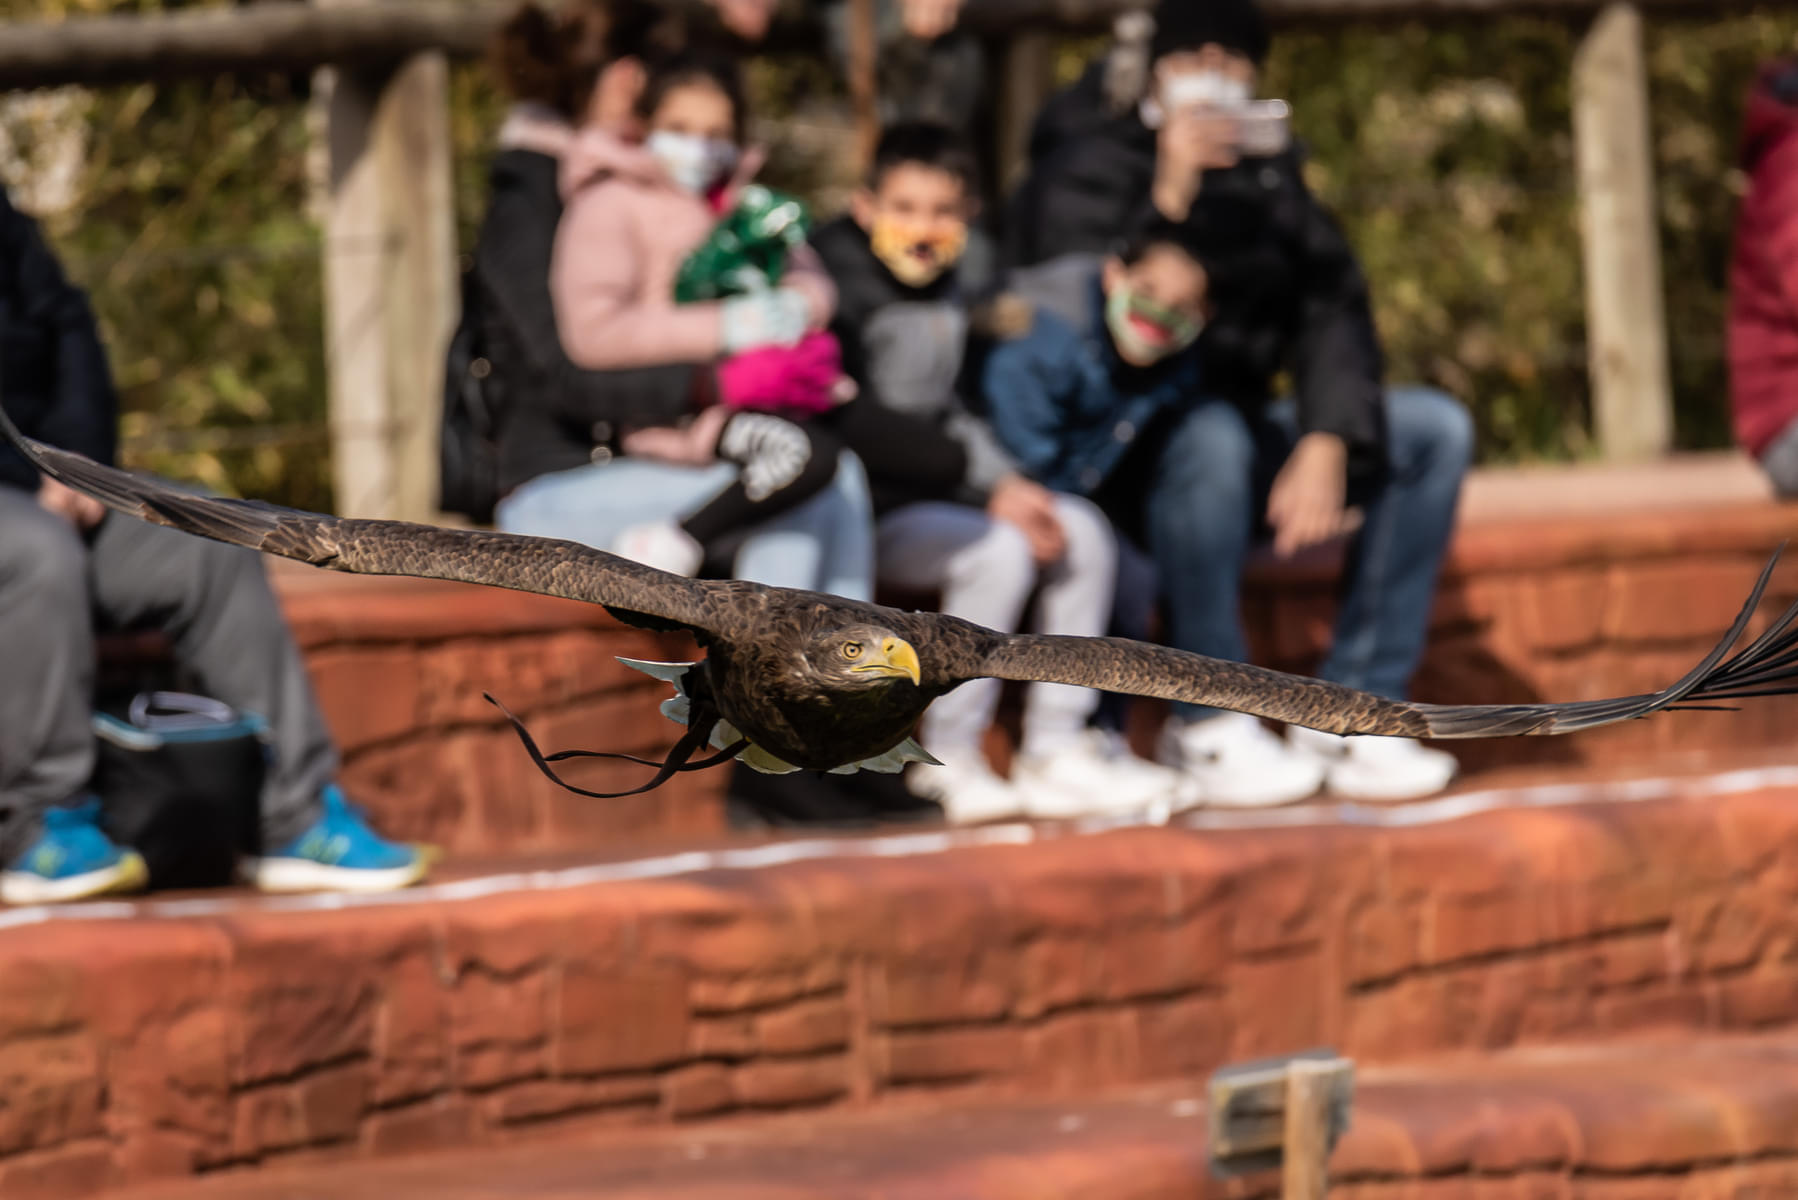 Watch eagles in action at the Birds of Prey exhibition